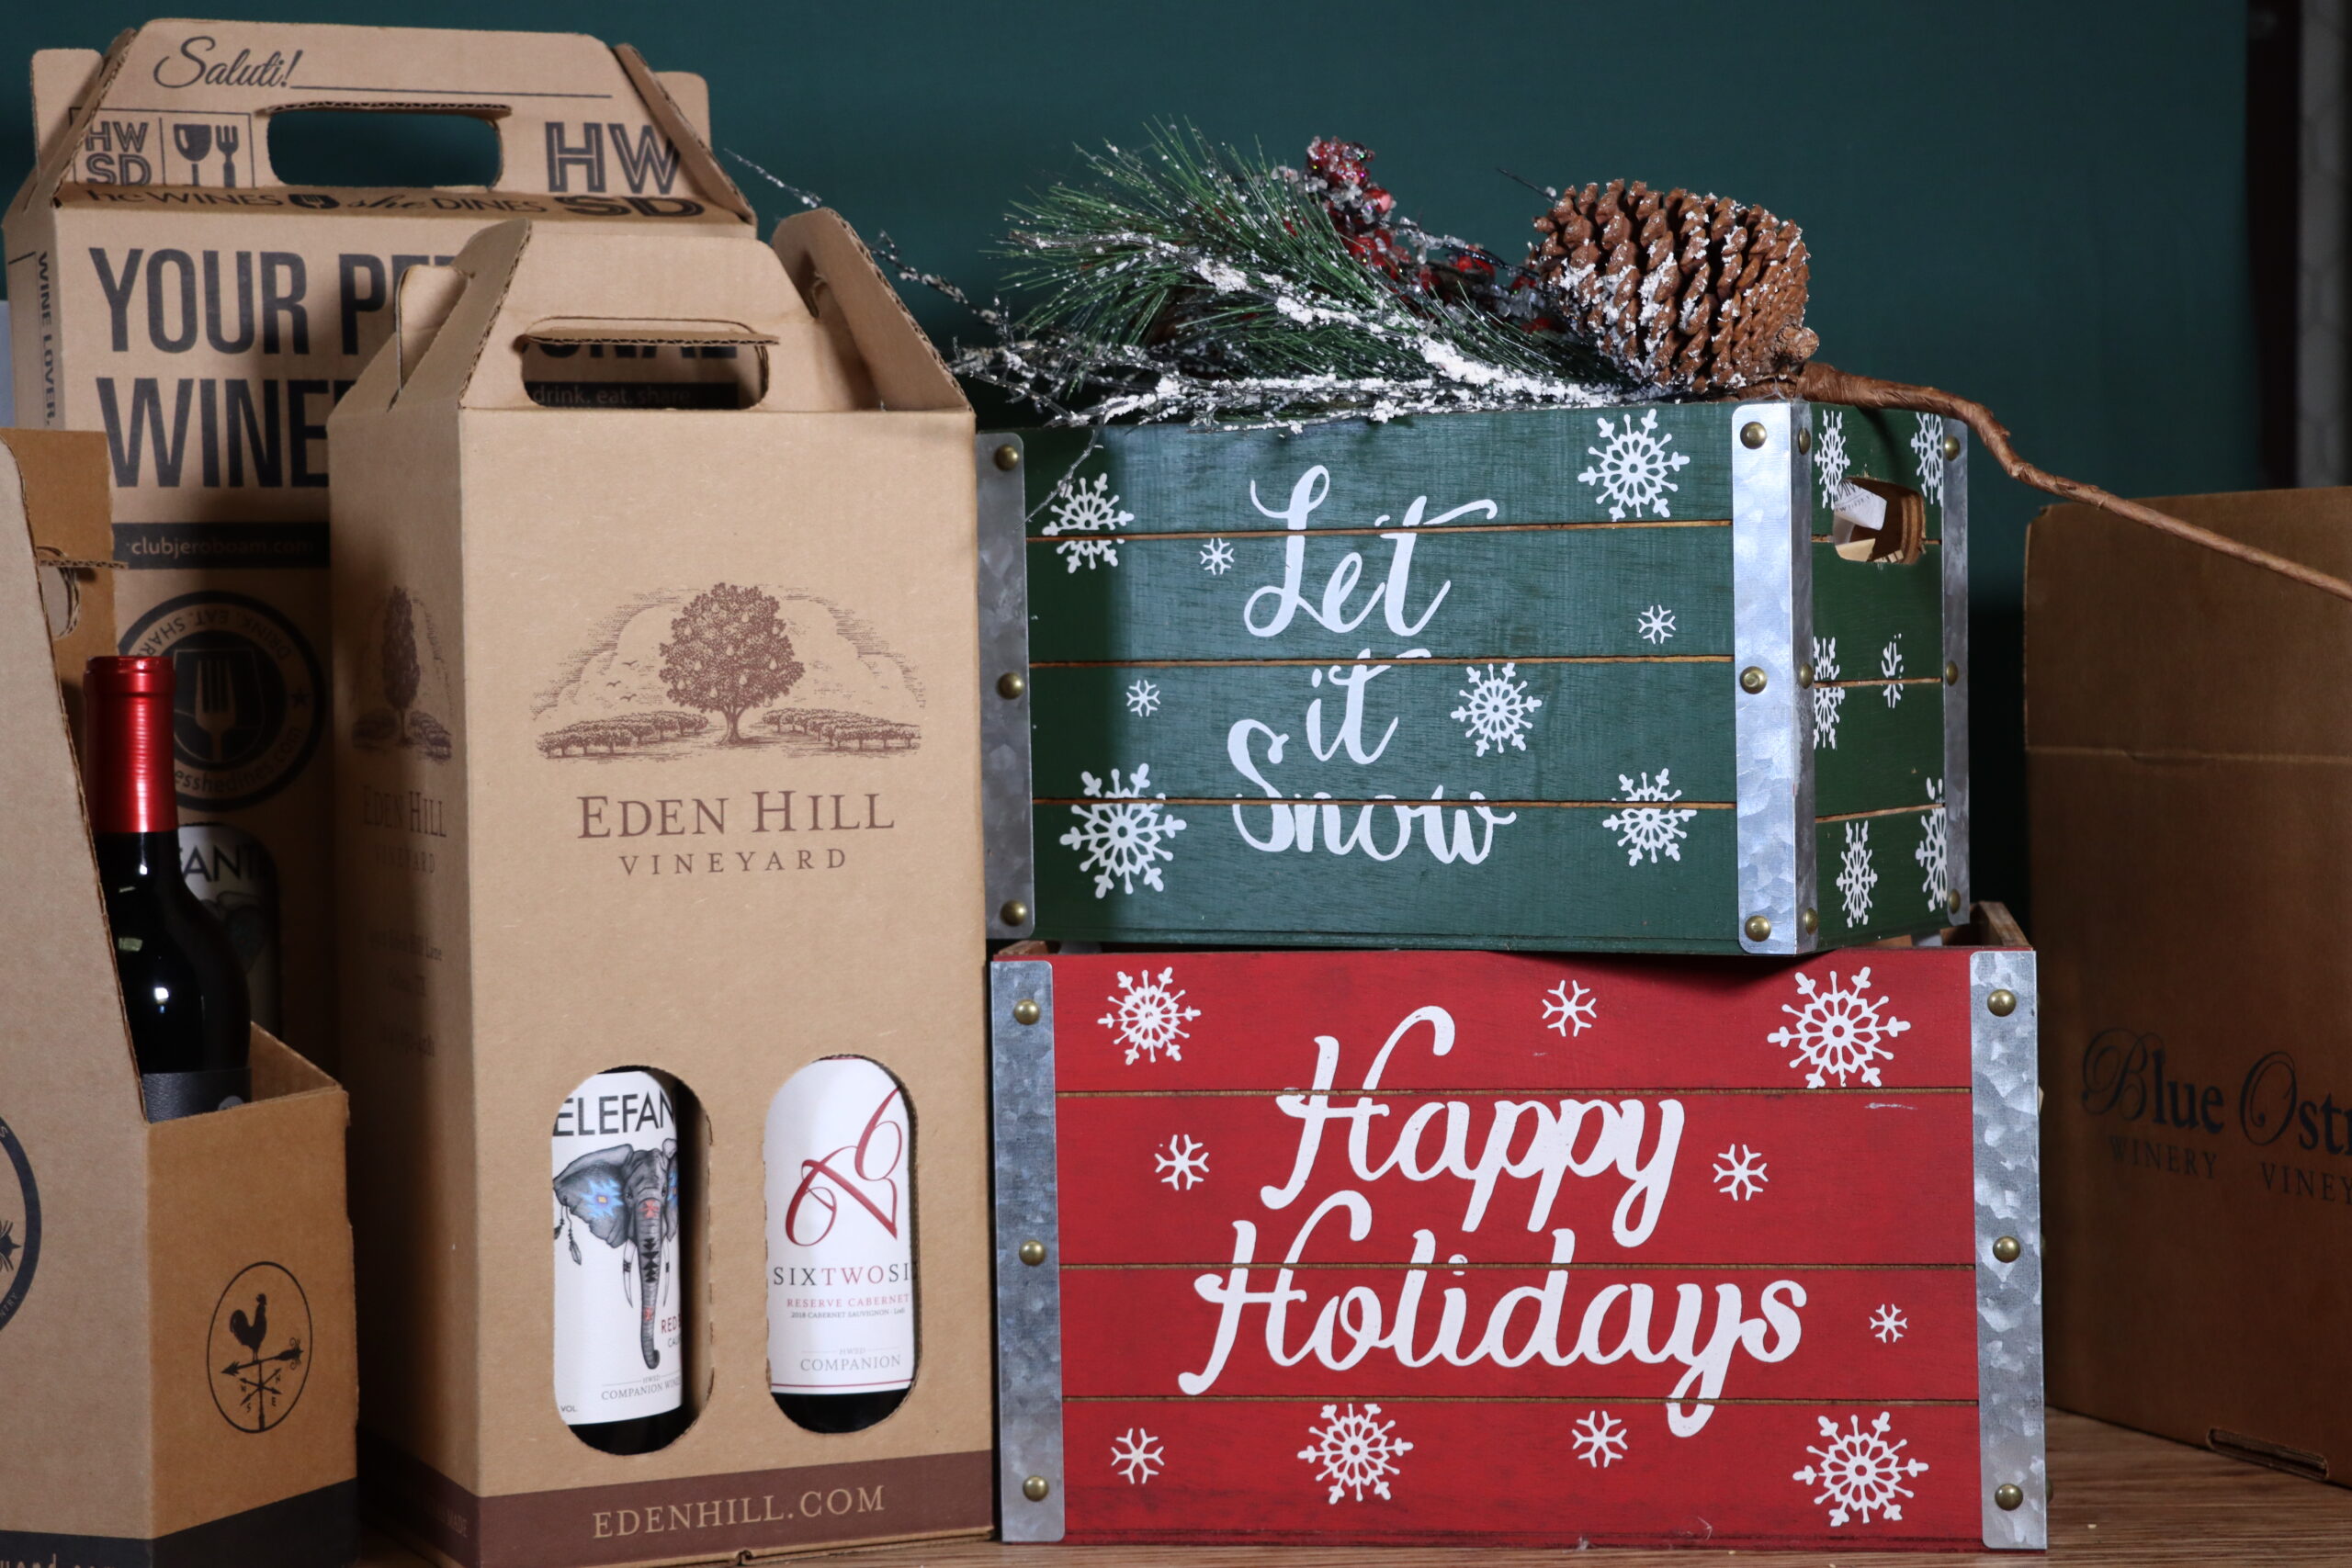 Wine carton and holiday boxes